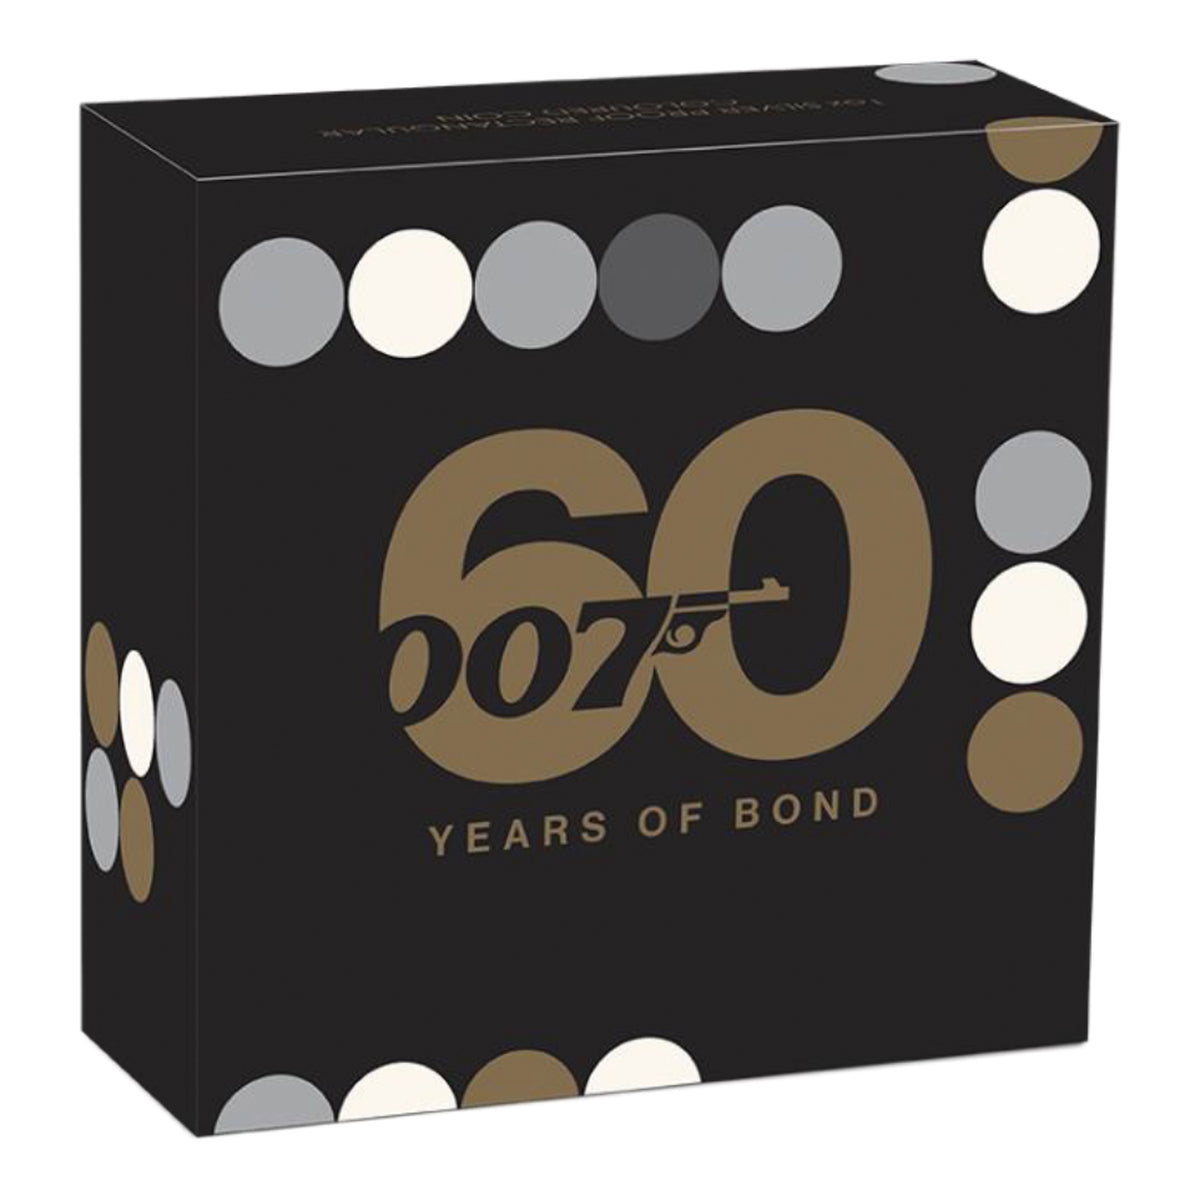 James Bond 60 Years of Bond 1oz Gold Proof Rectangular Coin - By The Perth Mint